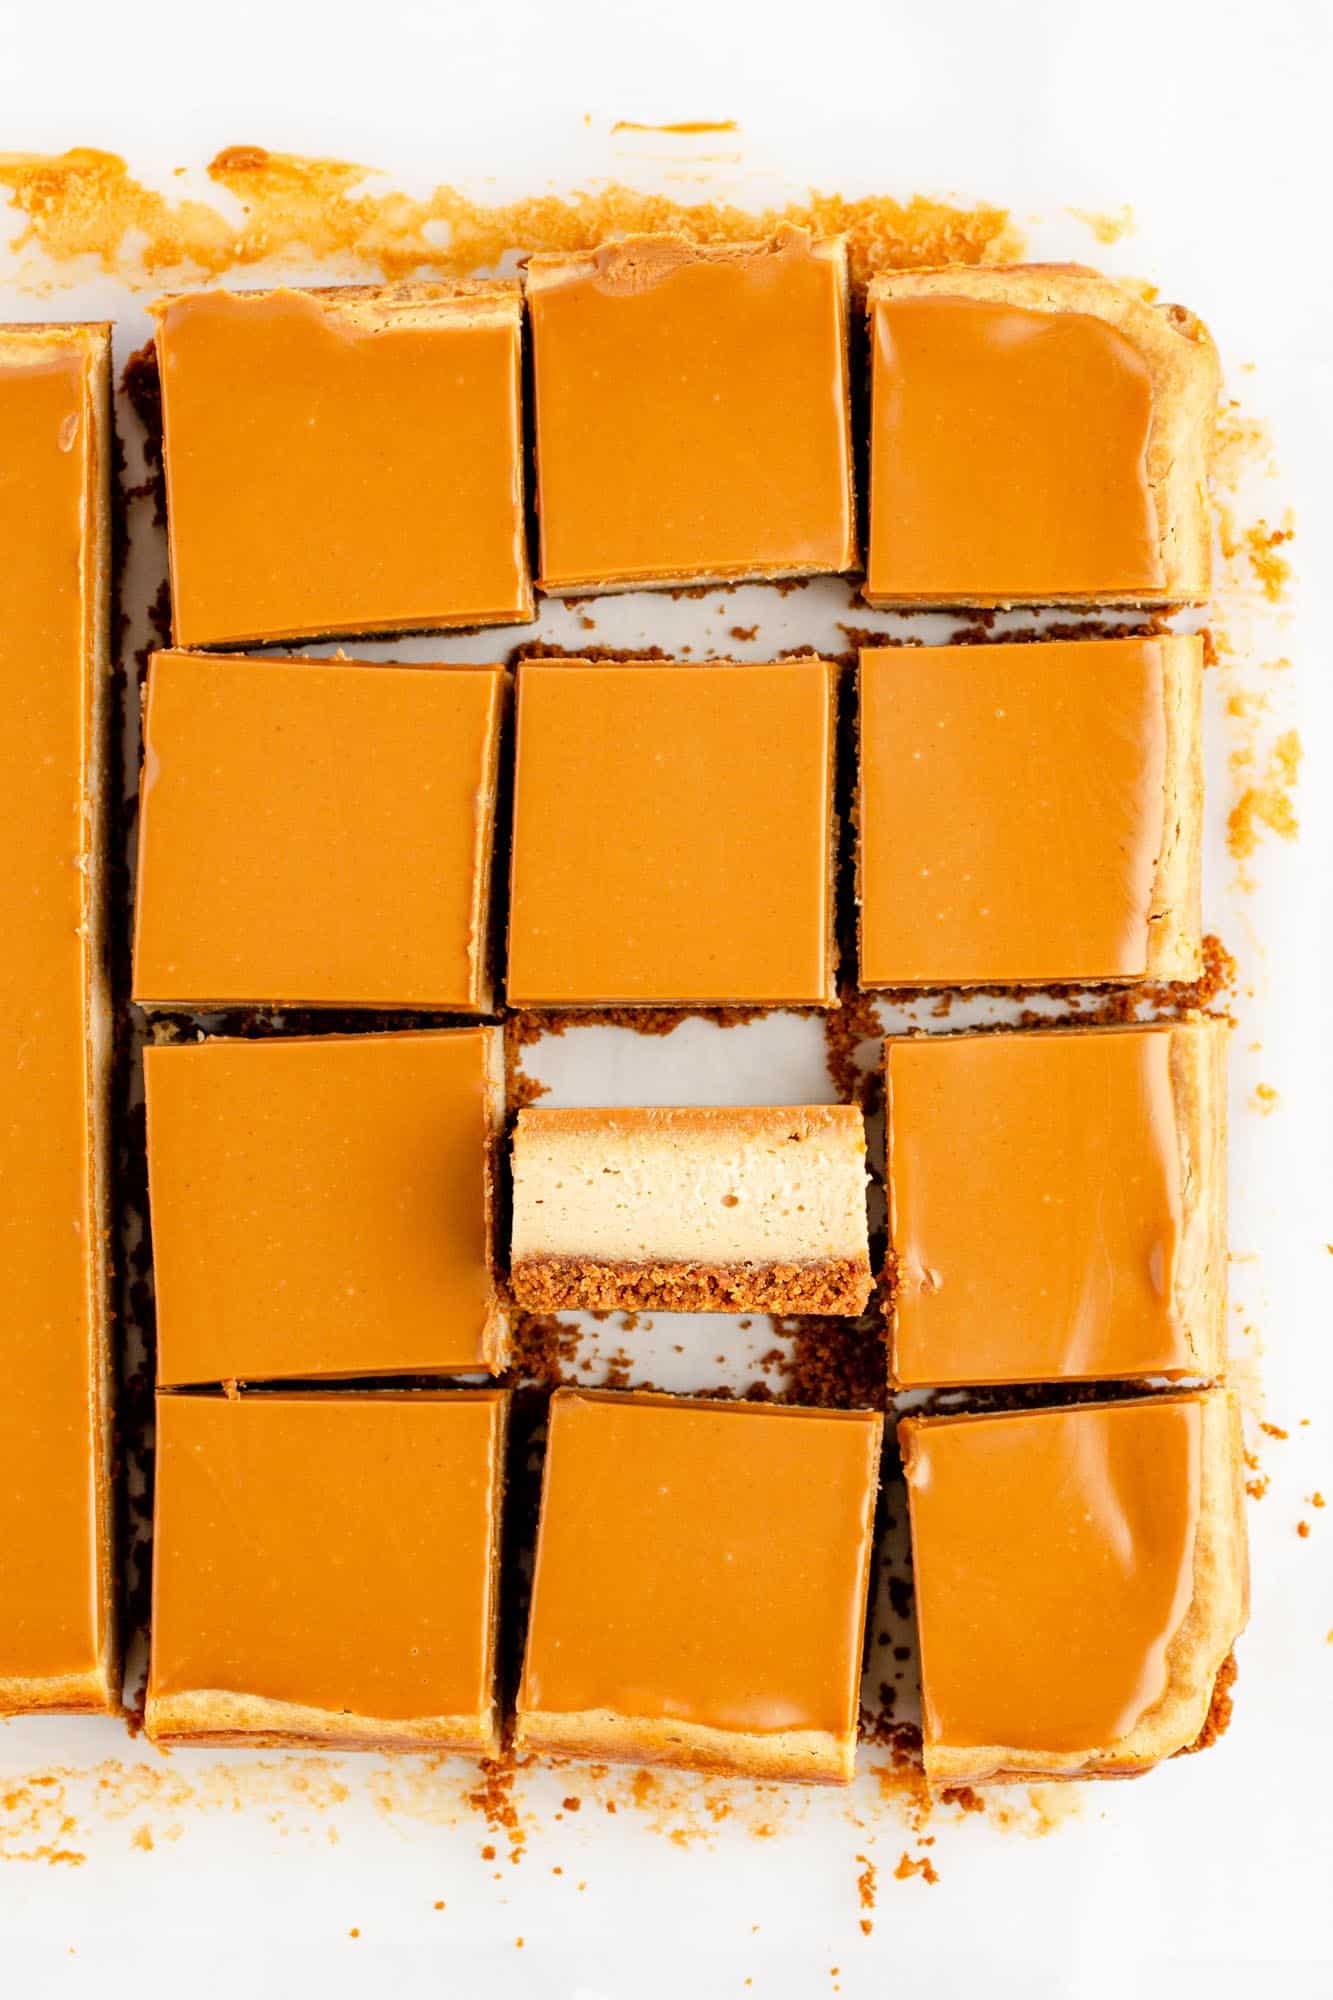 Biscoff cookie bars cut into squares, viewed from above